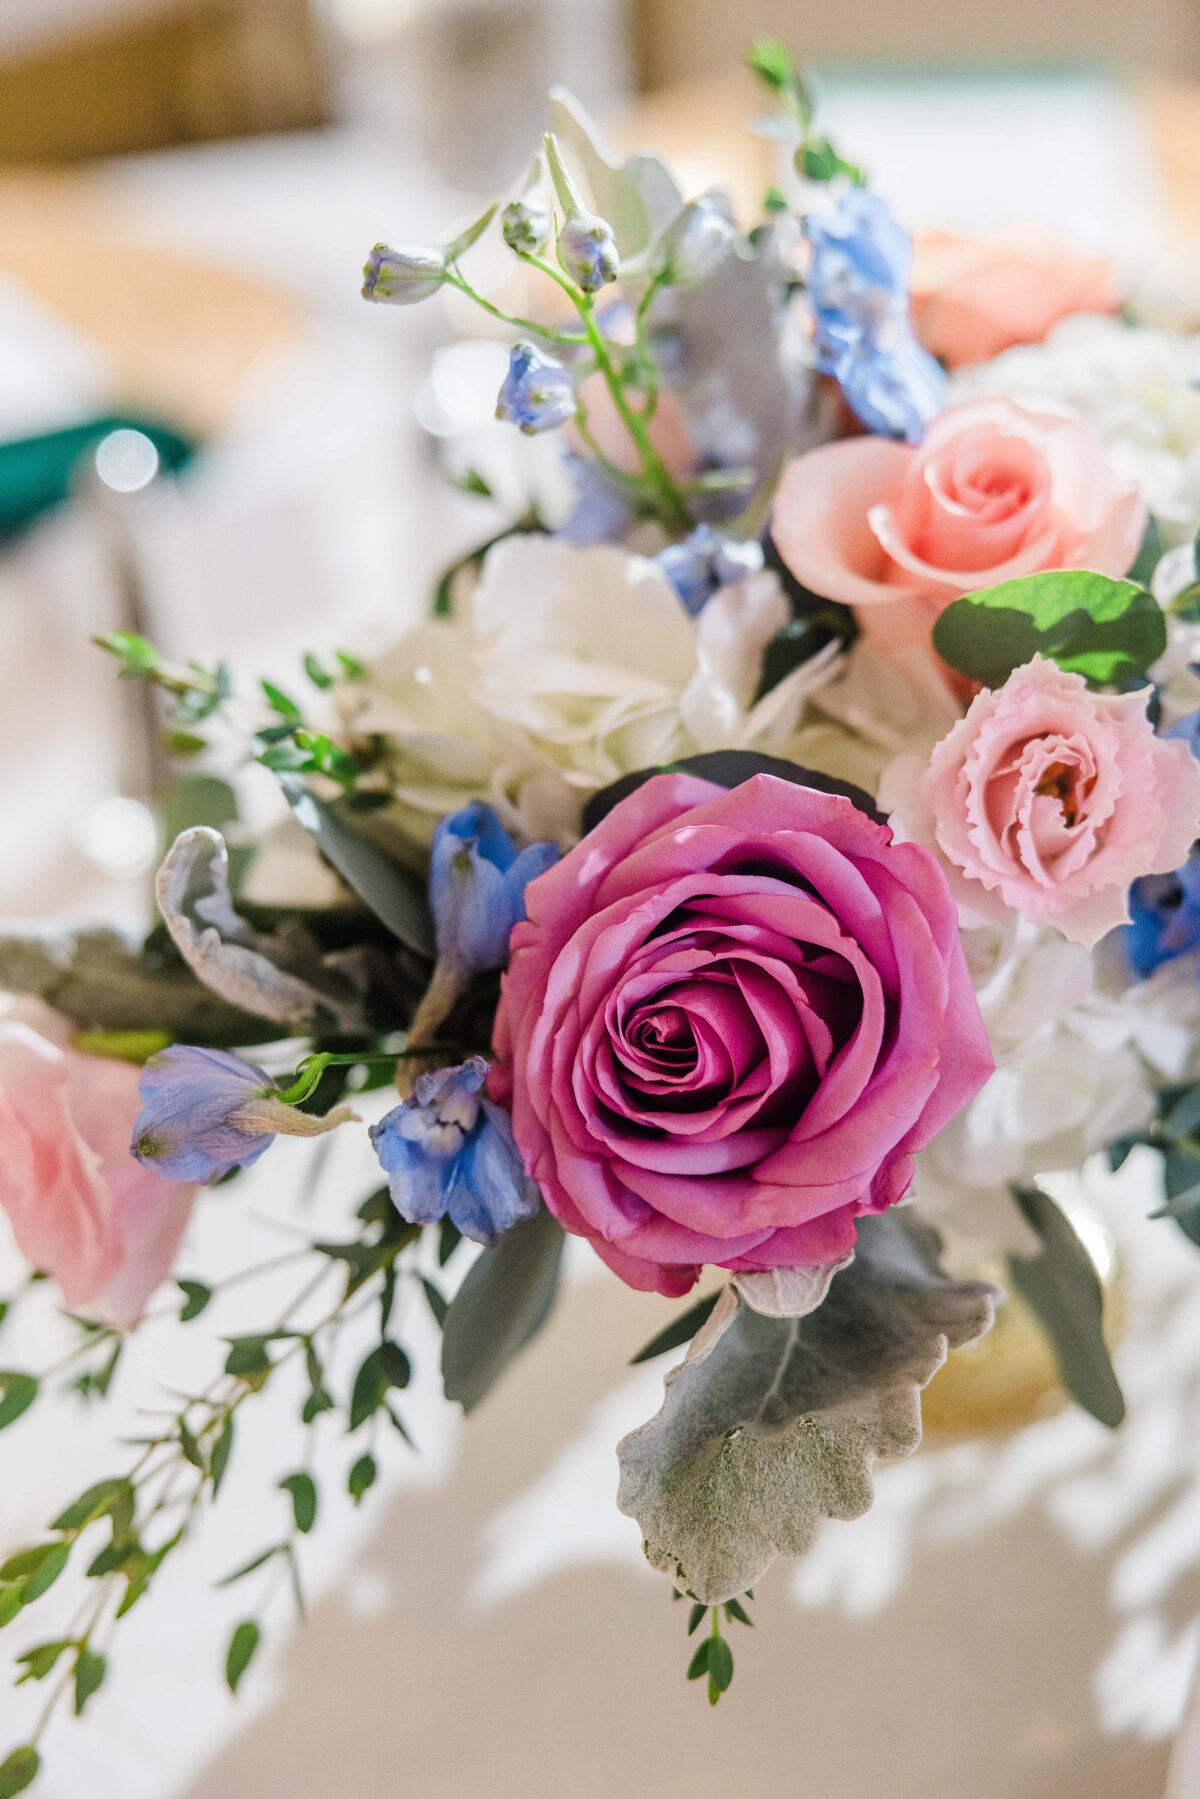 Close-up image of a vibrant floral arrangement for events in Davenport, featuring a prominent pink rose, surrounded by light pink roses and blue flowers.